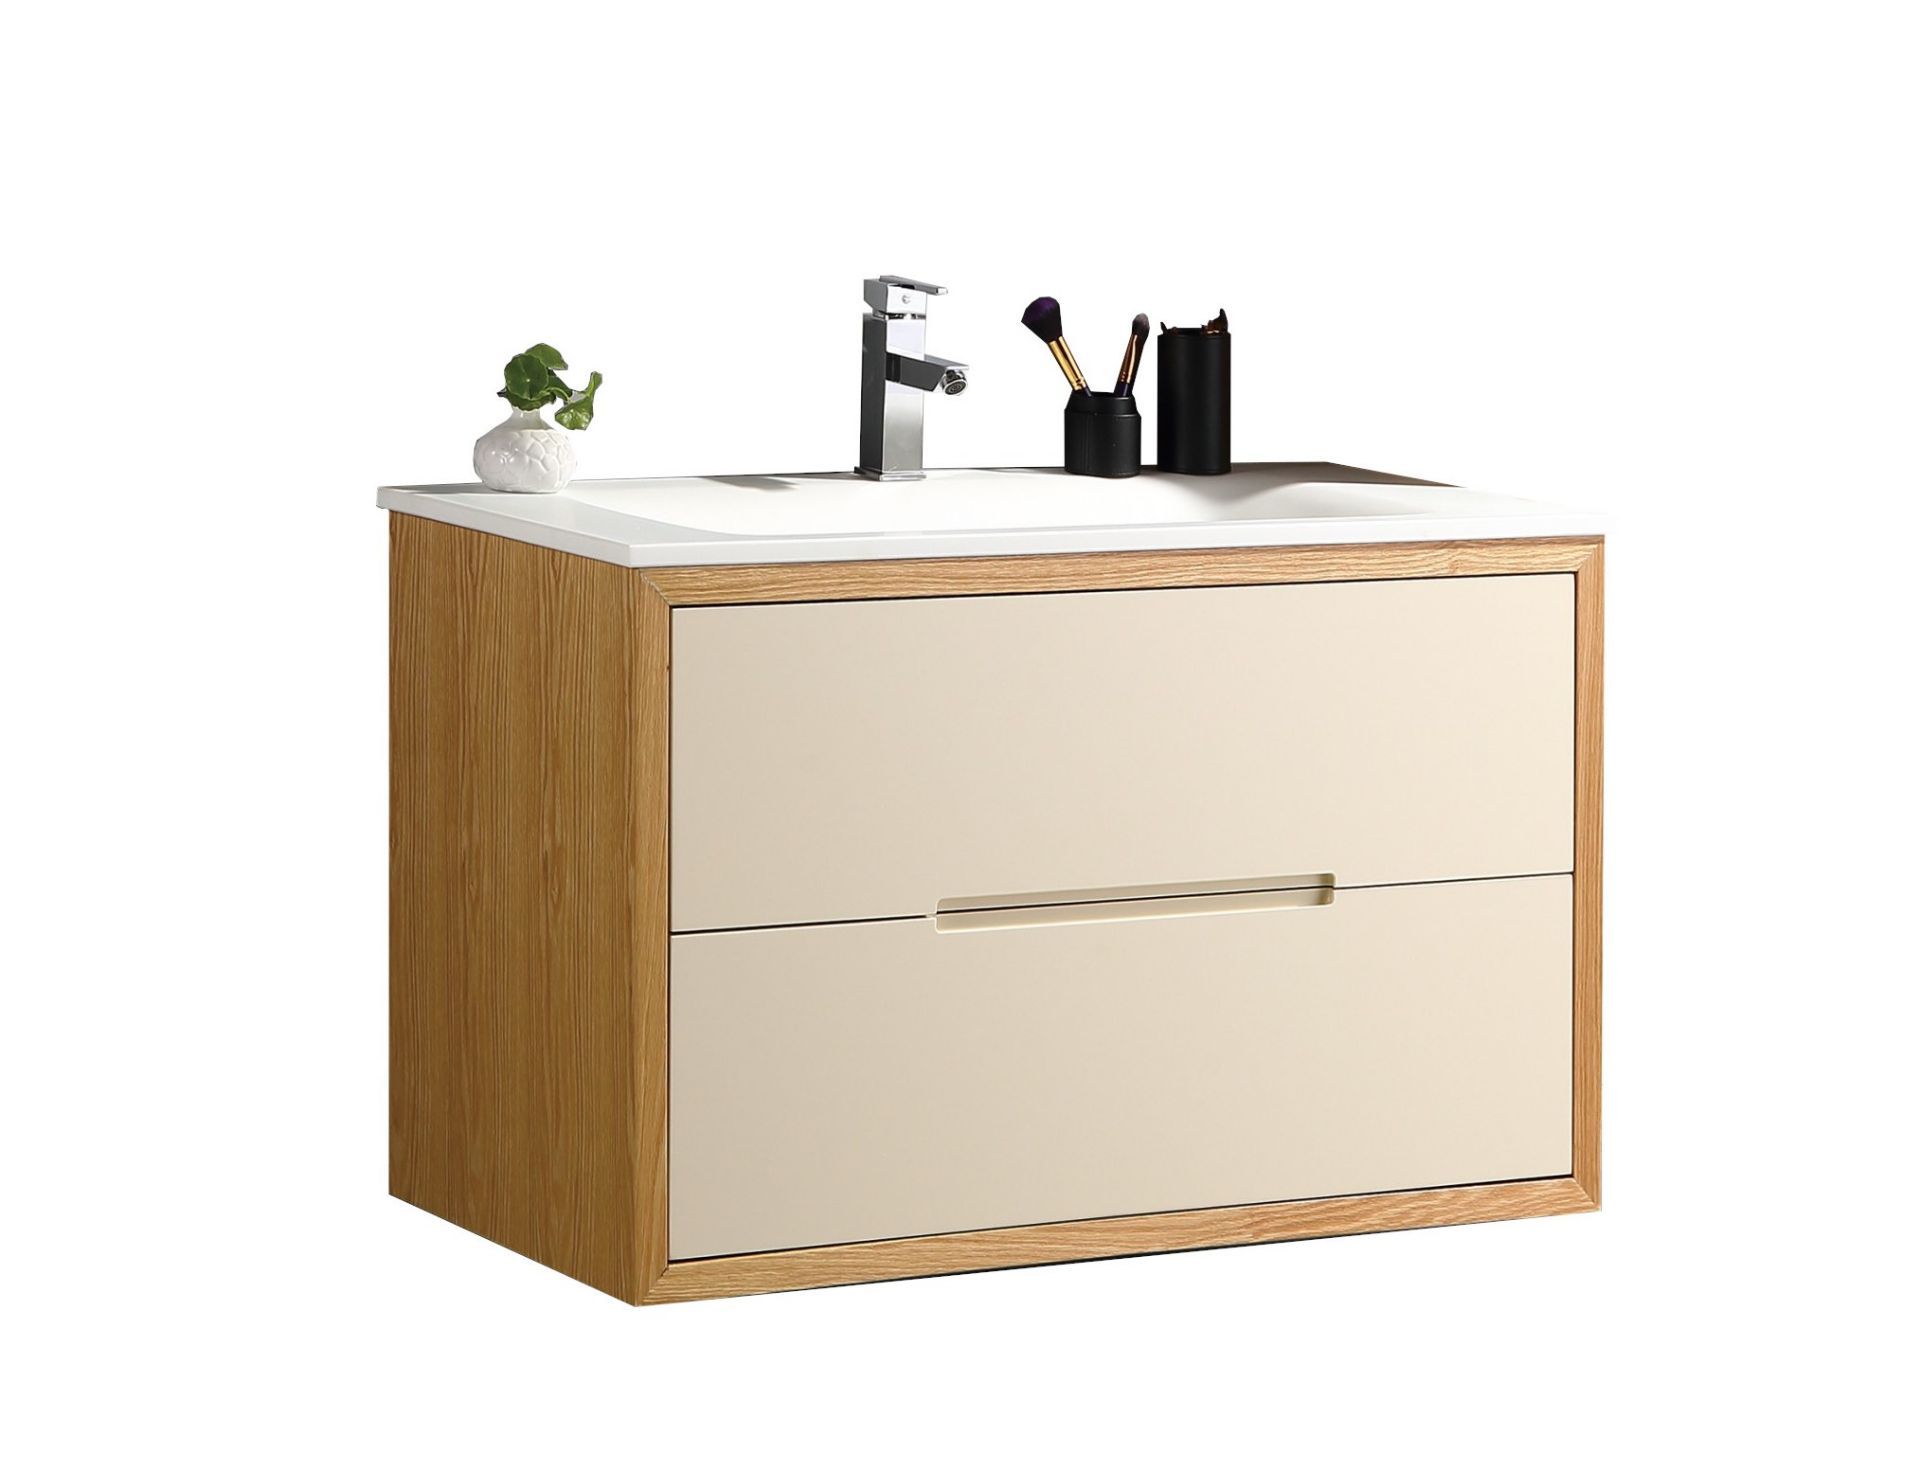 BRAND NEW Complete Vanity Unit Set in Beige with fixtures and fittings RRP £999.99 *NO VAT* - Image 4 of 5